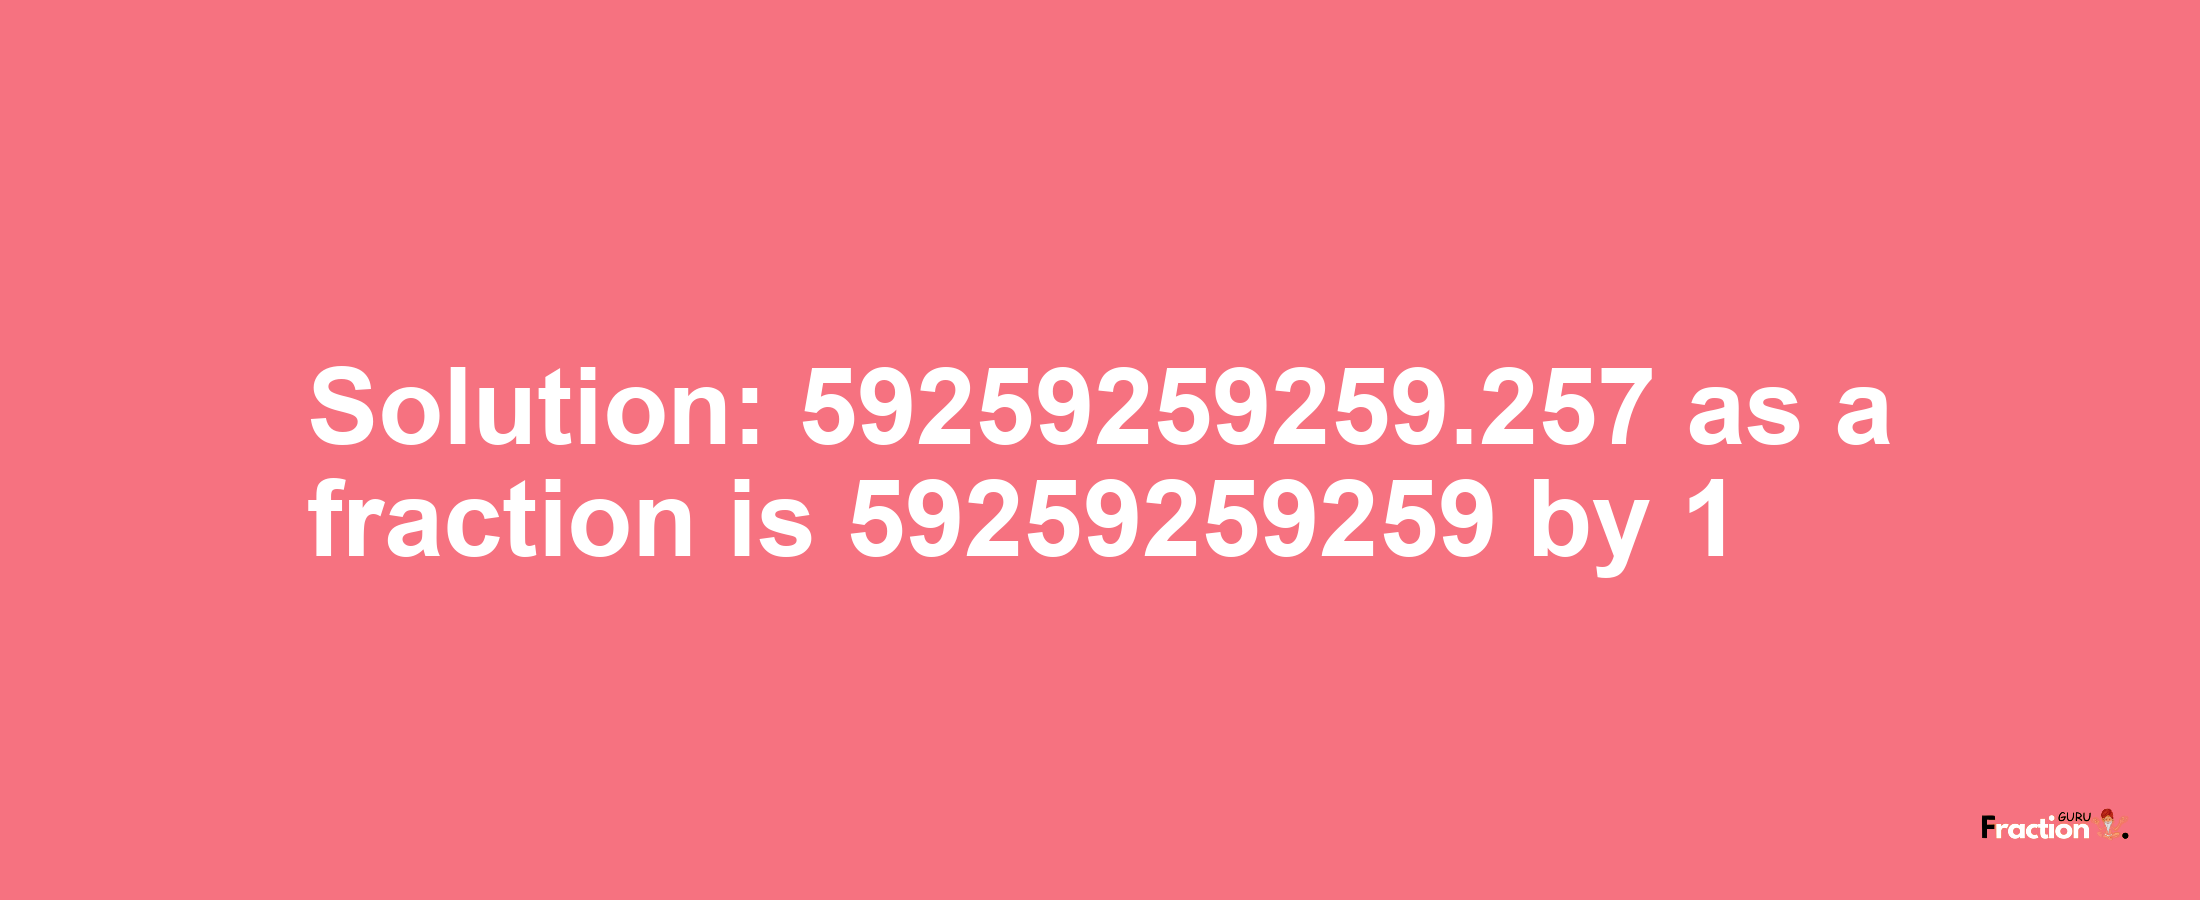 Solution:59259259259.257 as a fraction is 59259259259/1